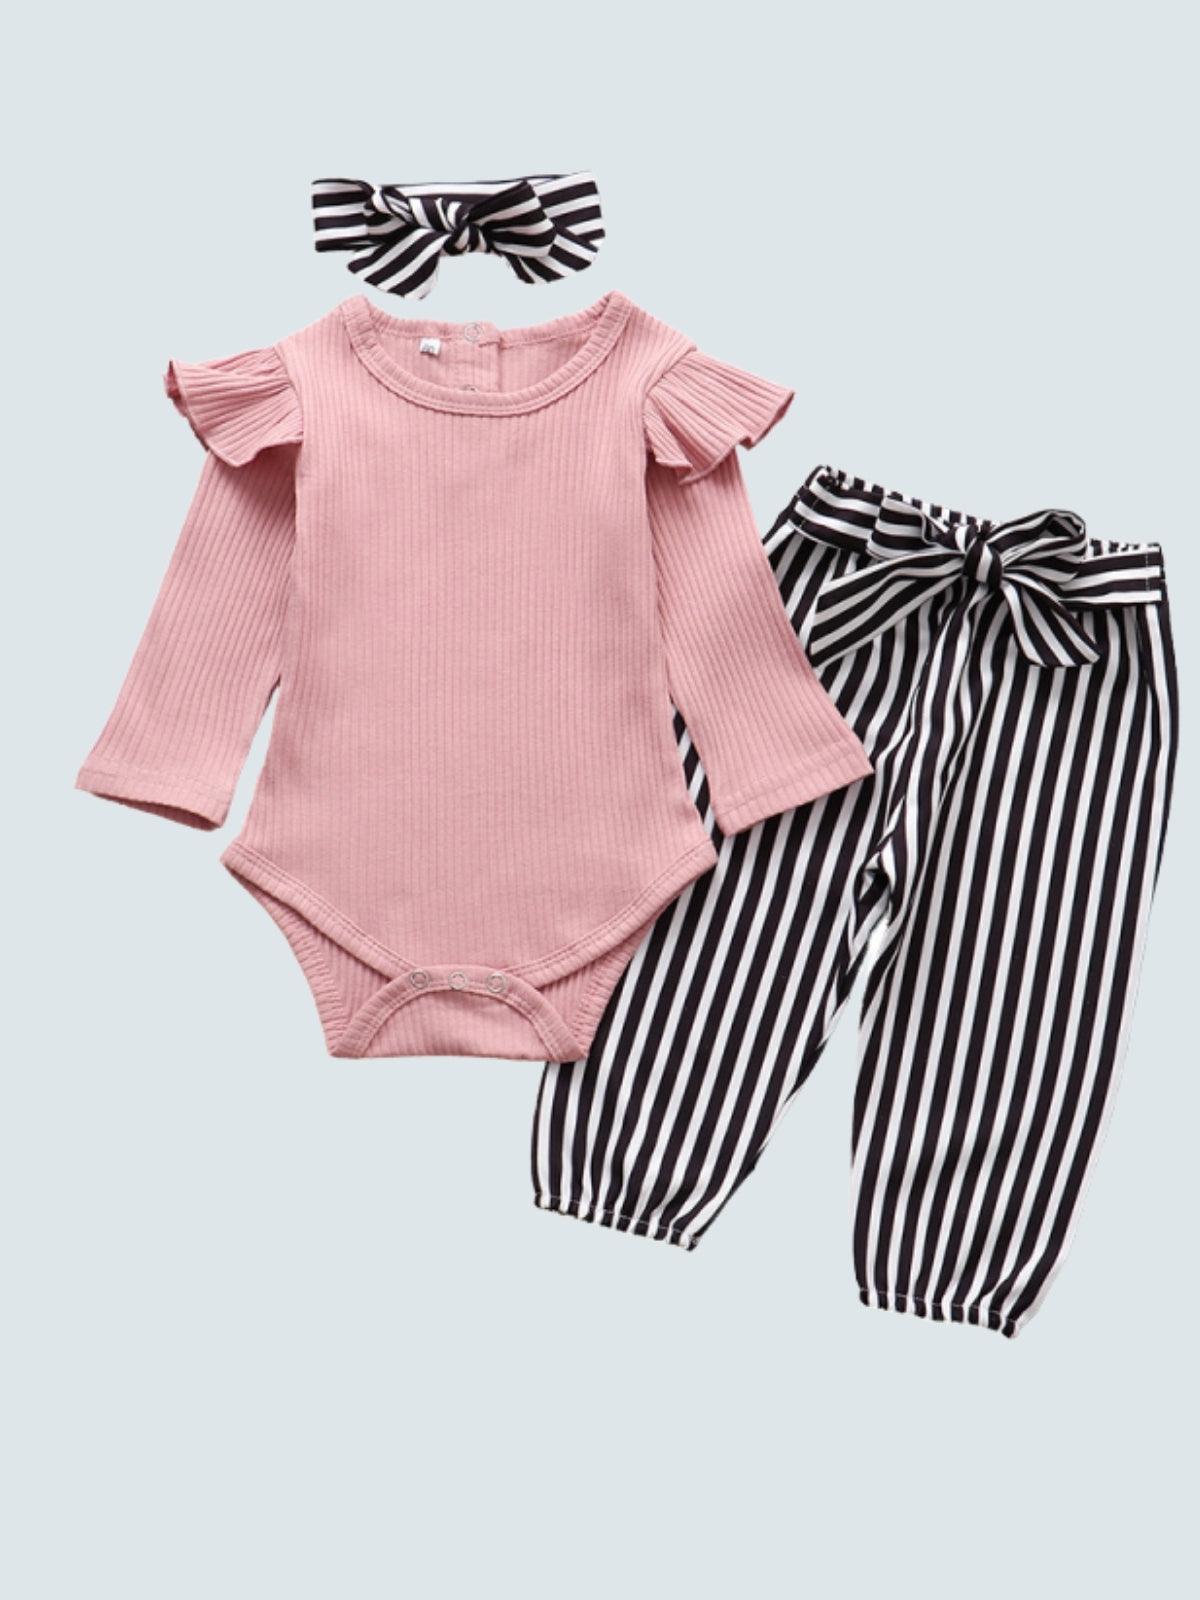 Baby Zebra in the Fall Onesie with Pants and Matching Headbands